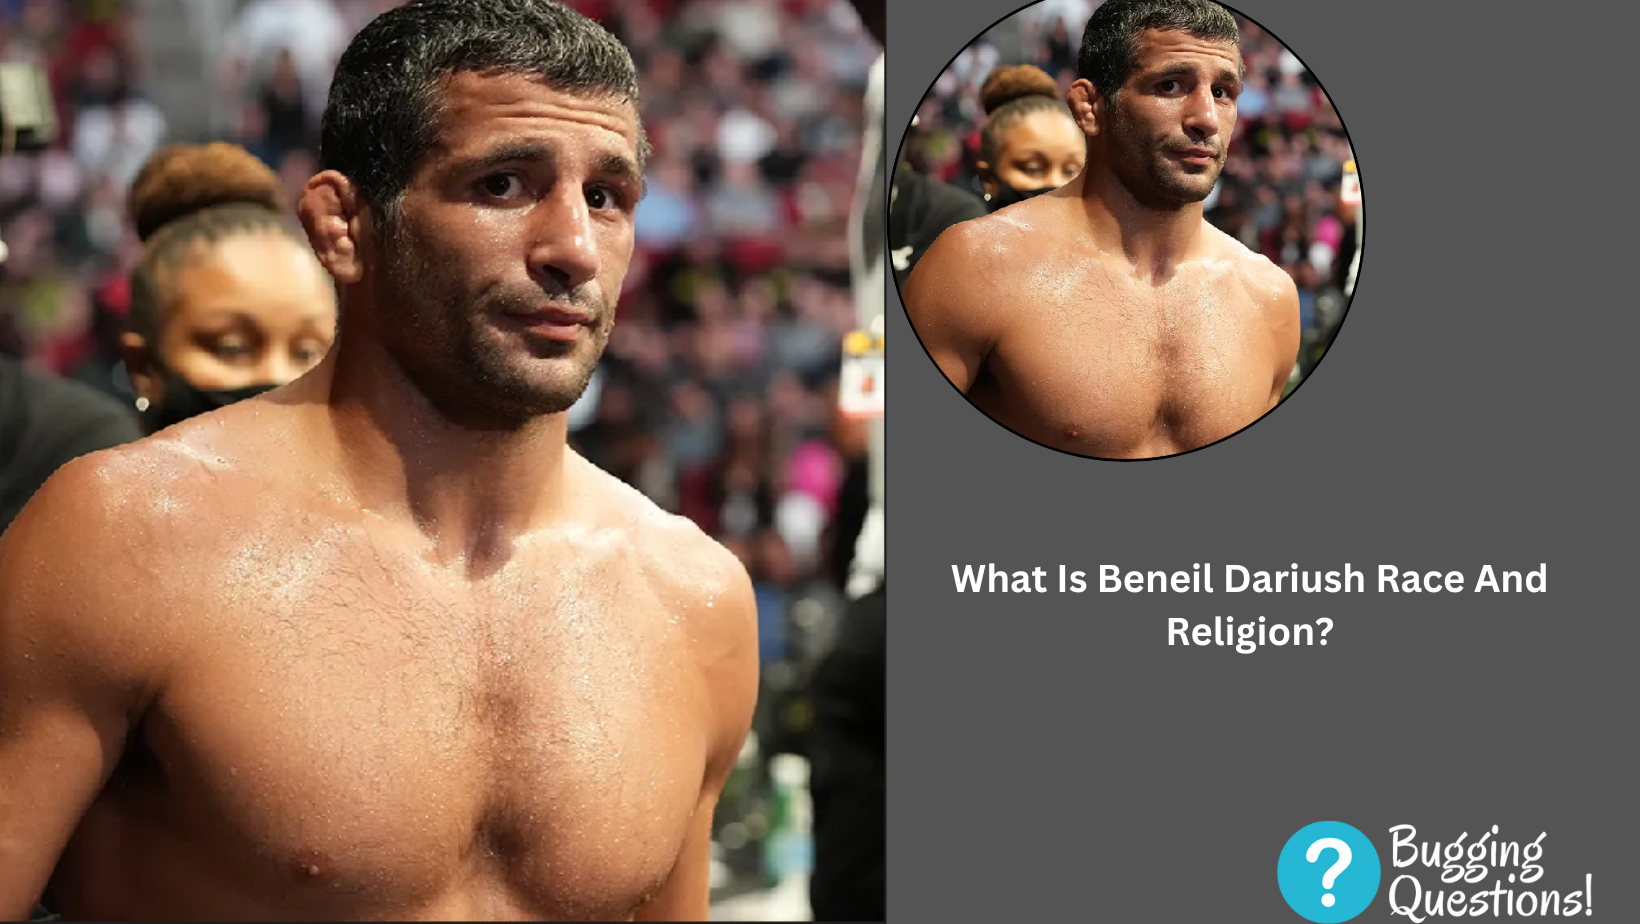 What Is Beneil Dariush Race And Religion?